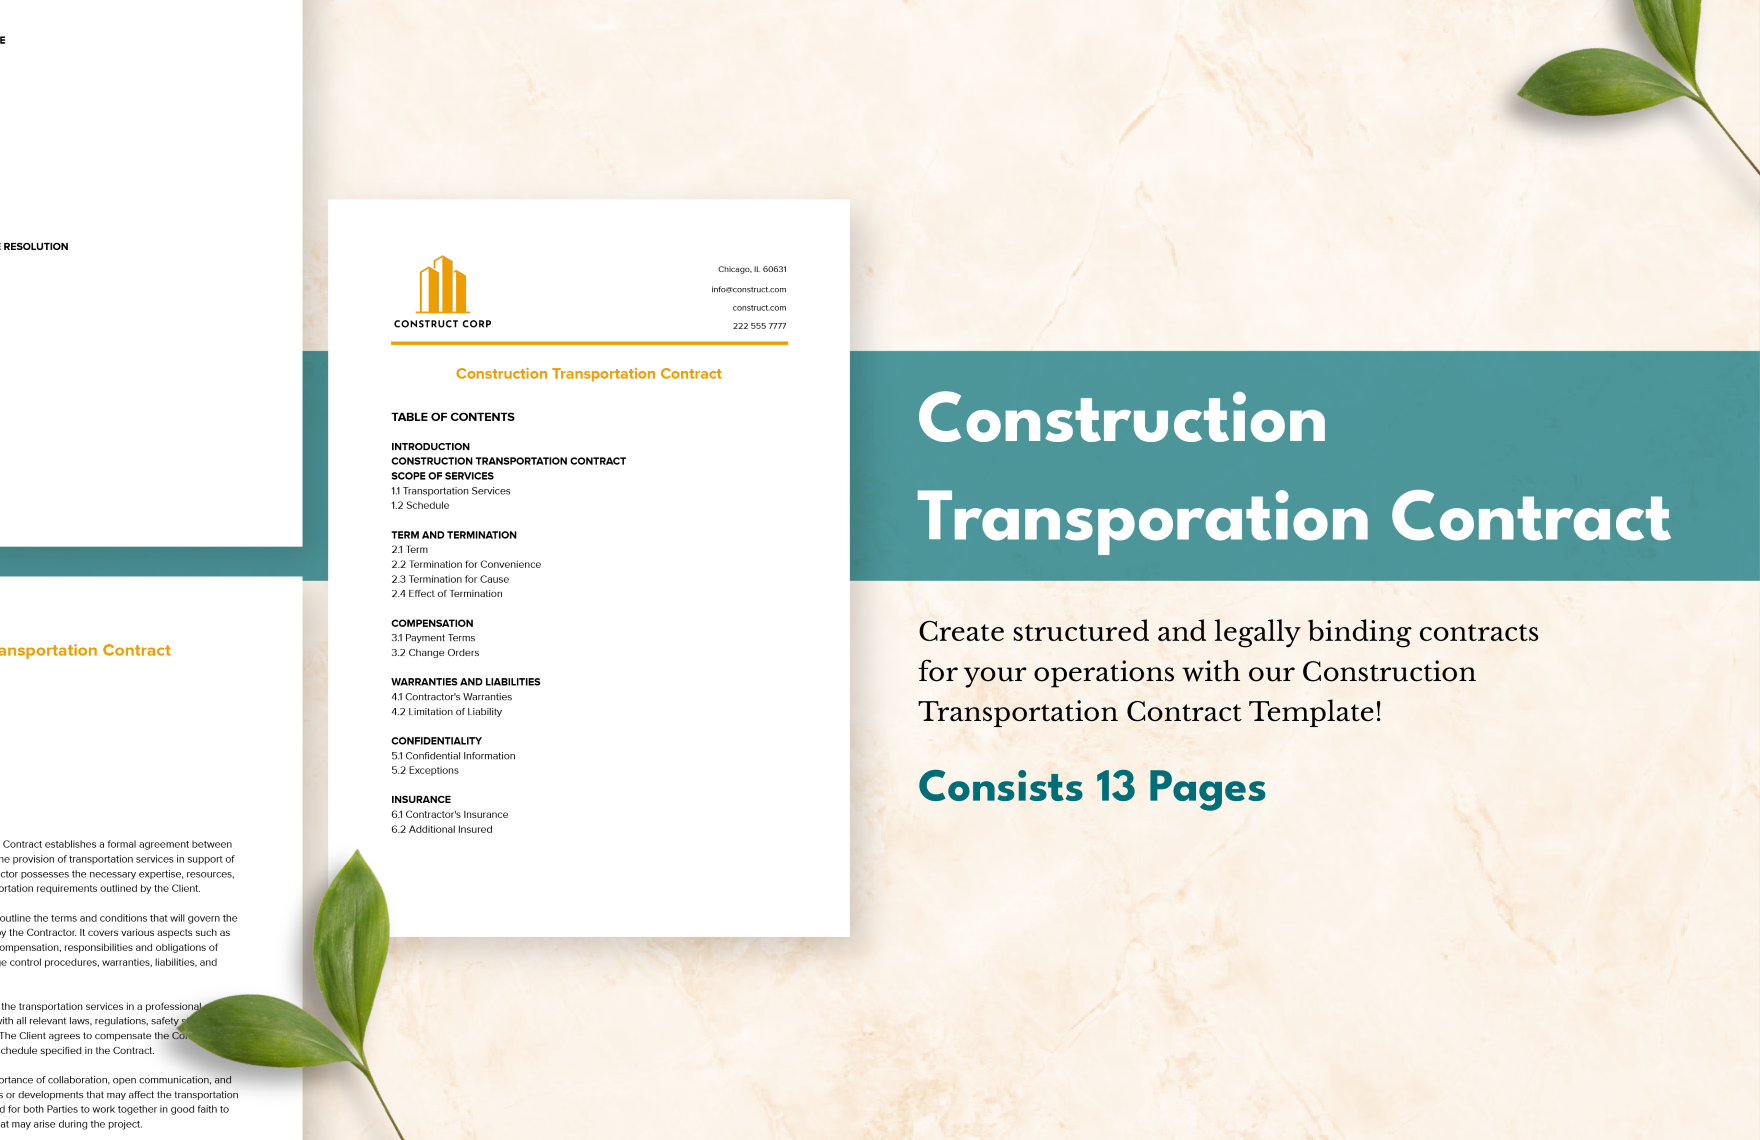 Construction Transportation Contract Template